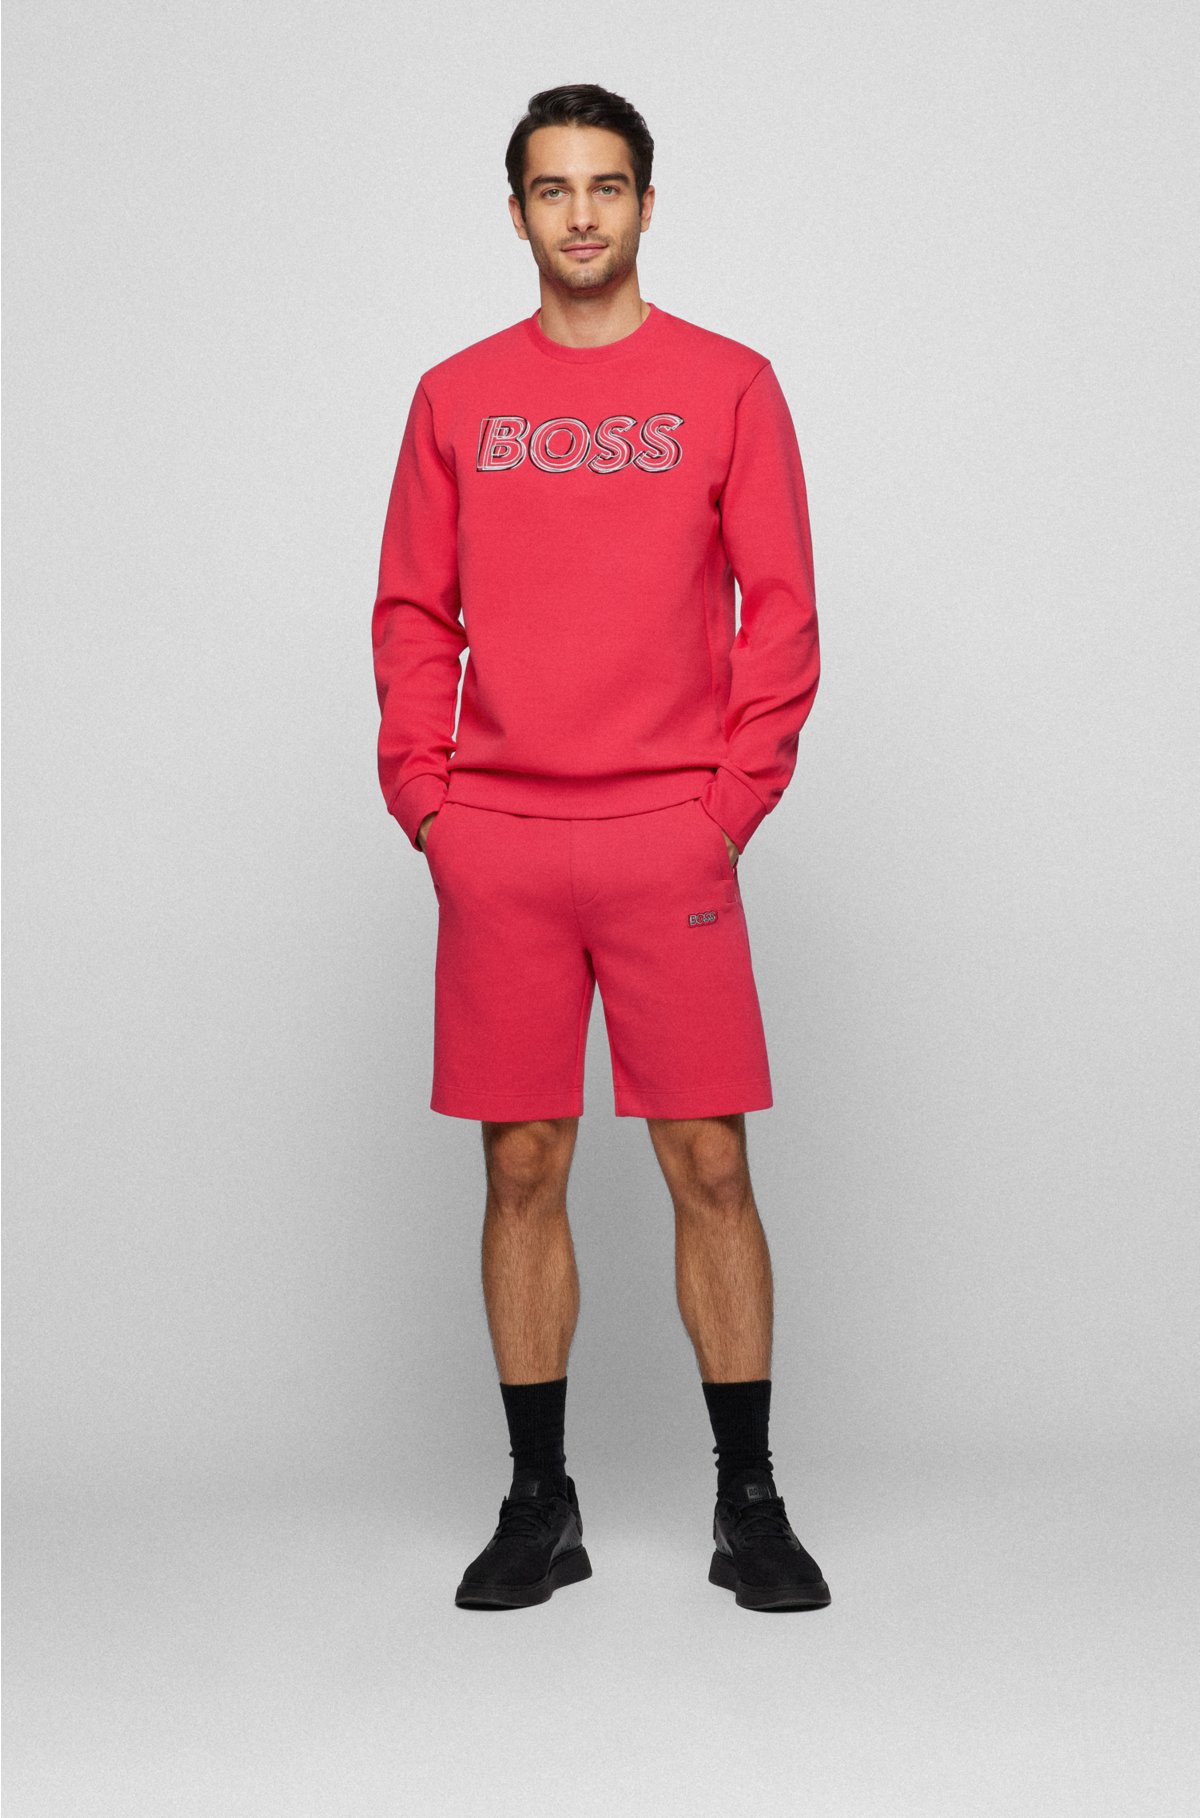 BOSS - logo regular-fit Cotton-blend with shorts multicolored